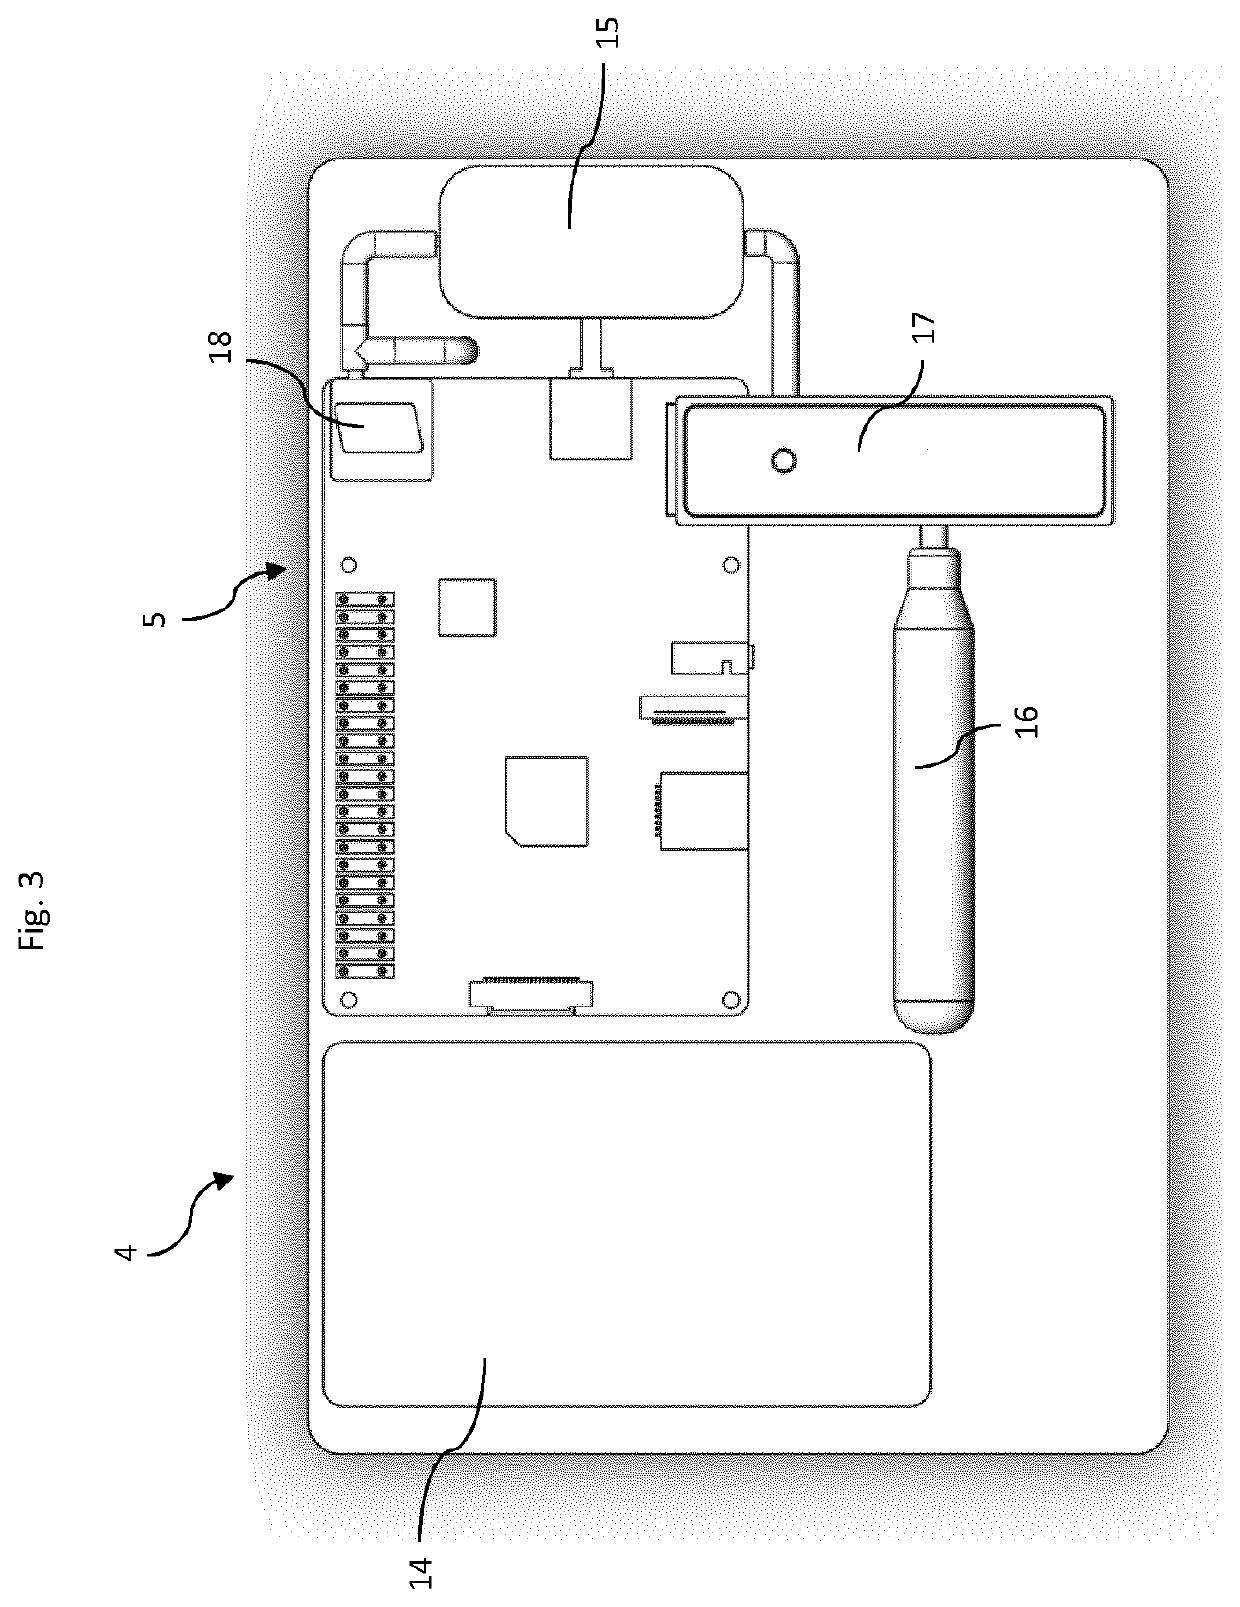 Device for processing a liquid sample